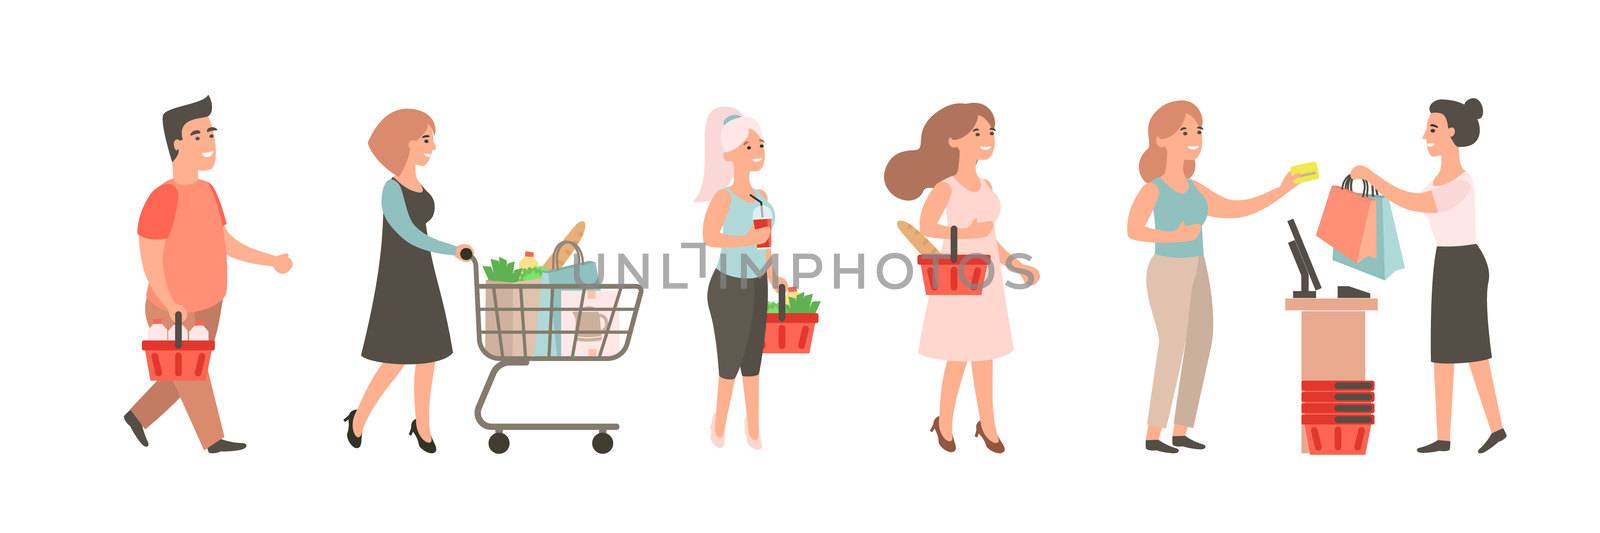 People waiting in long queue. Shopping people in supermarket, daily grocery purchase. Female cashier gives purchase to customer. People with carts and baskets awaiting their turn.